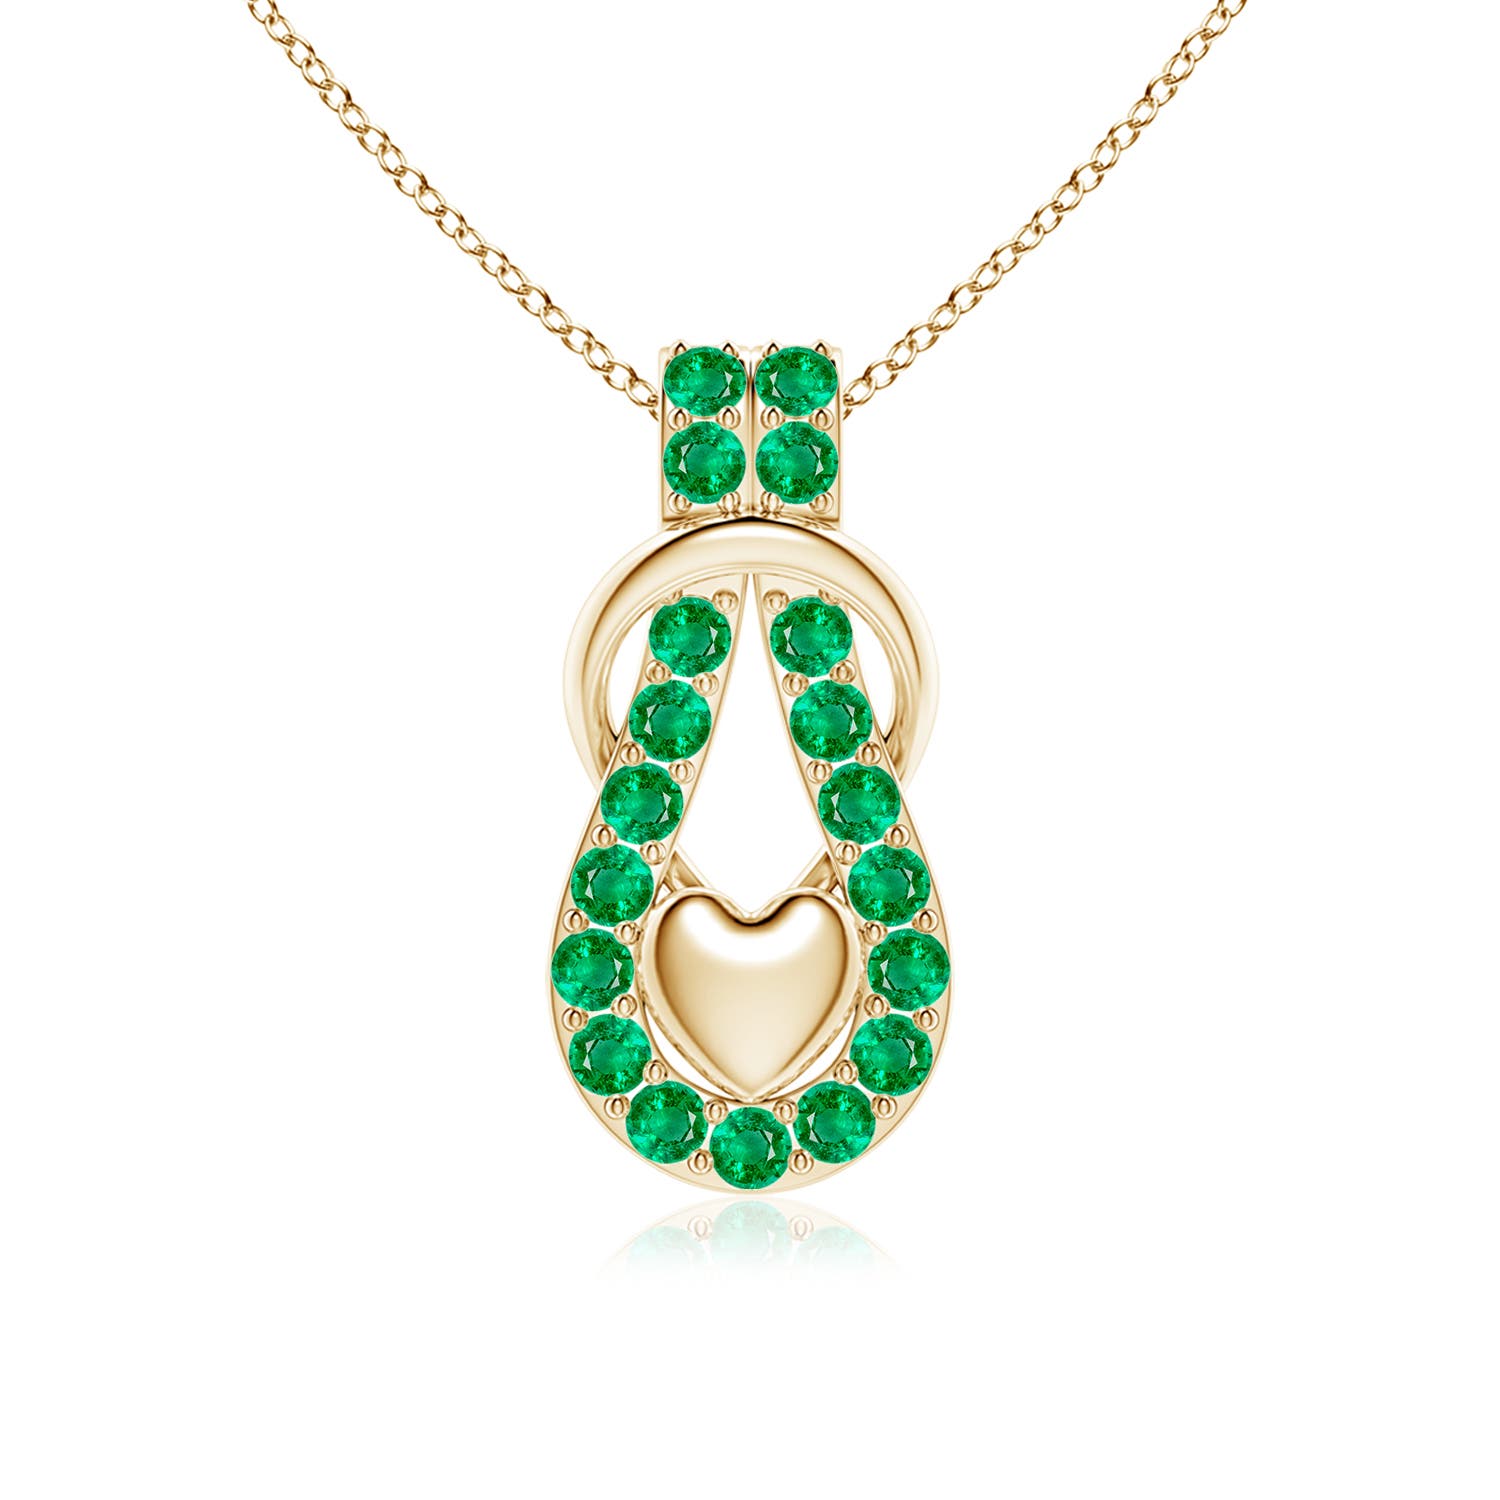 AAA - Emerald / 1.2 CT / 14 KT Yellow Gold